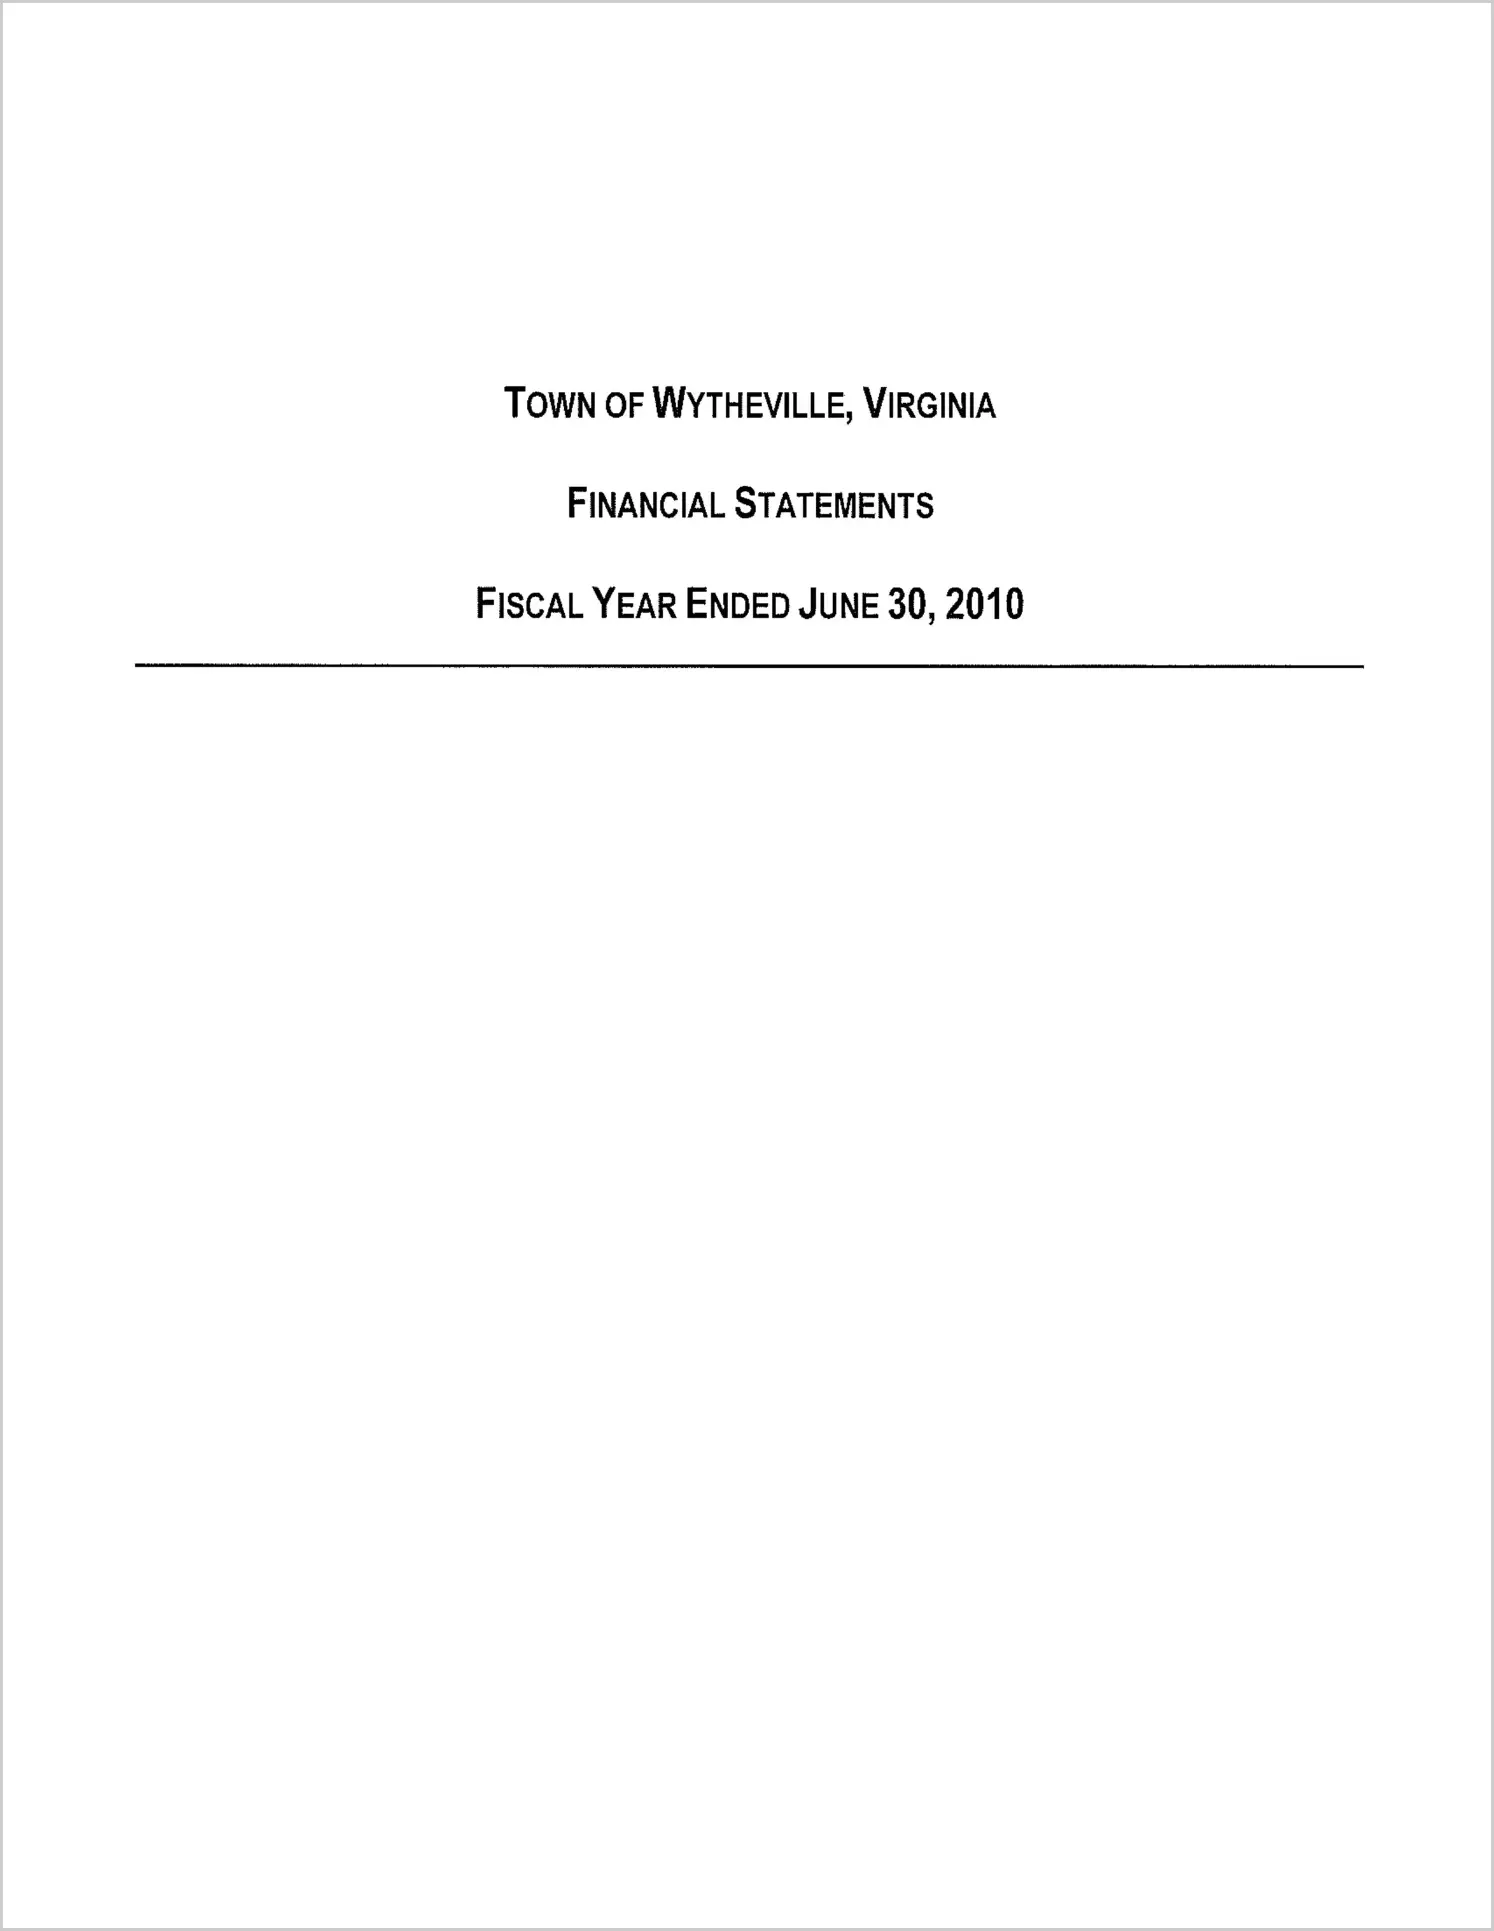 2010 Annual Financial Report for Town of Wytheville